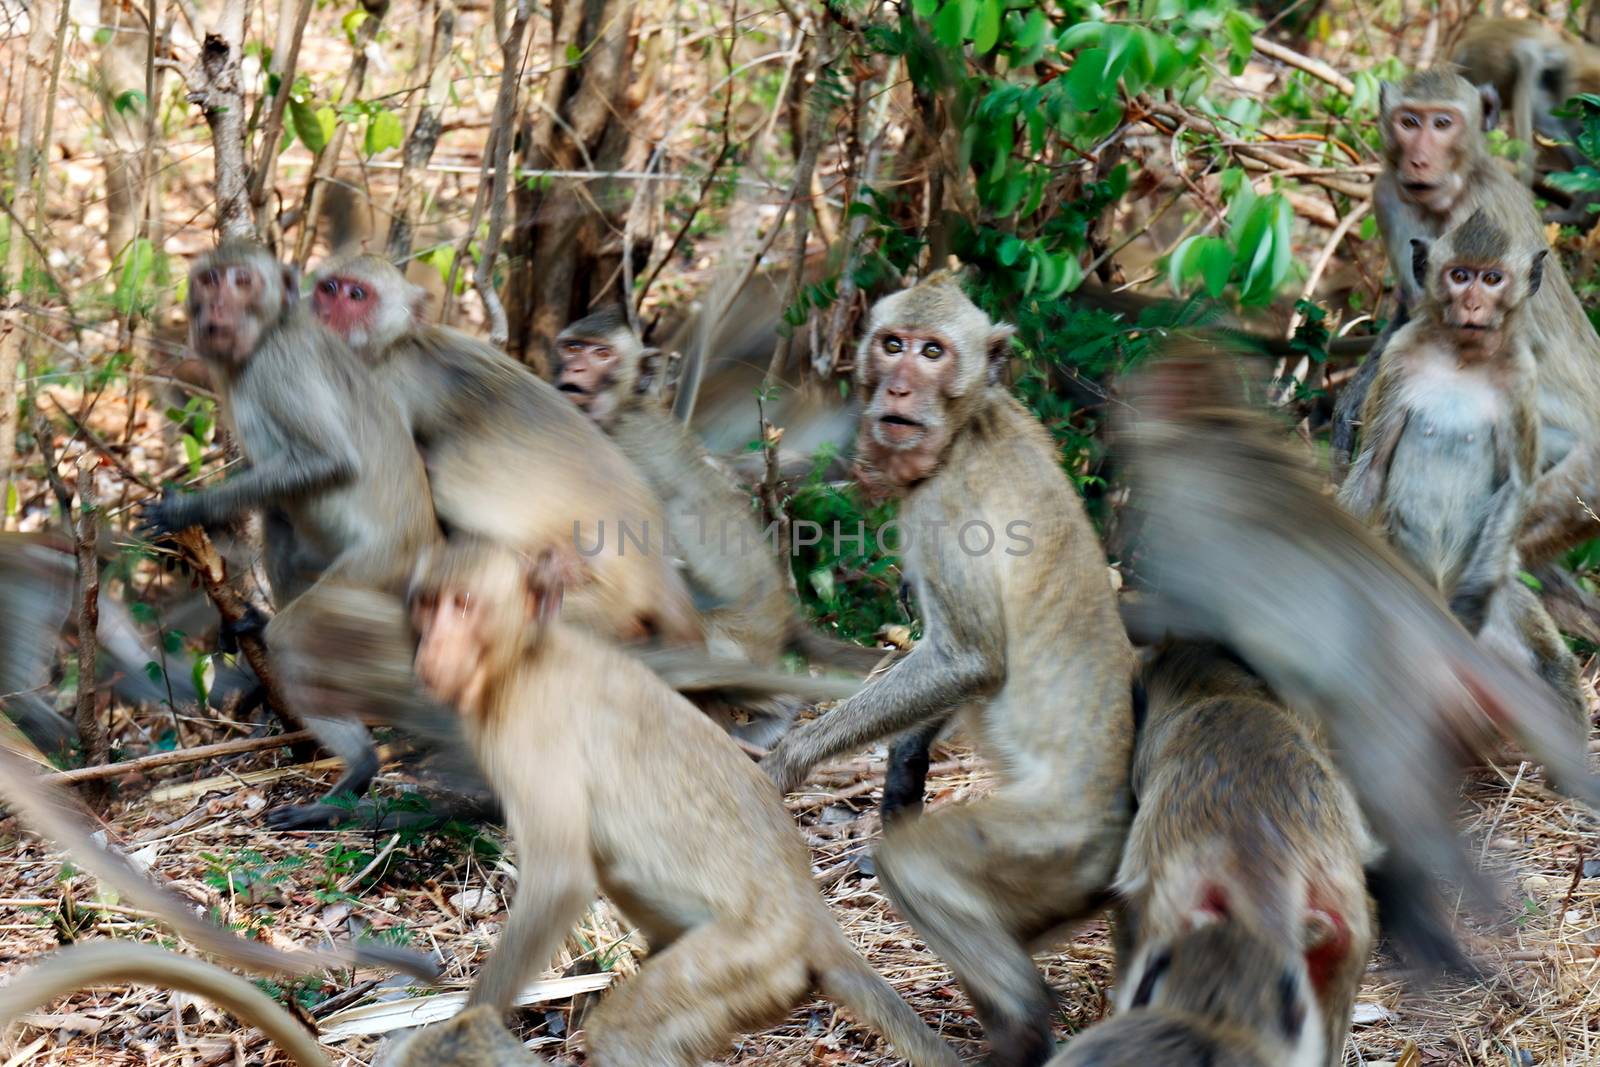 Lots of monkeys panicked stampede Jumping and movement in the forest by cgdeaw